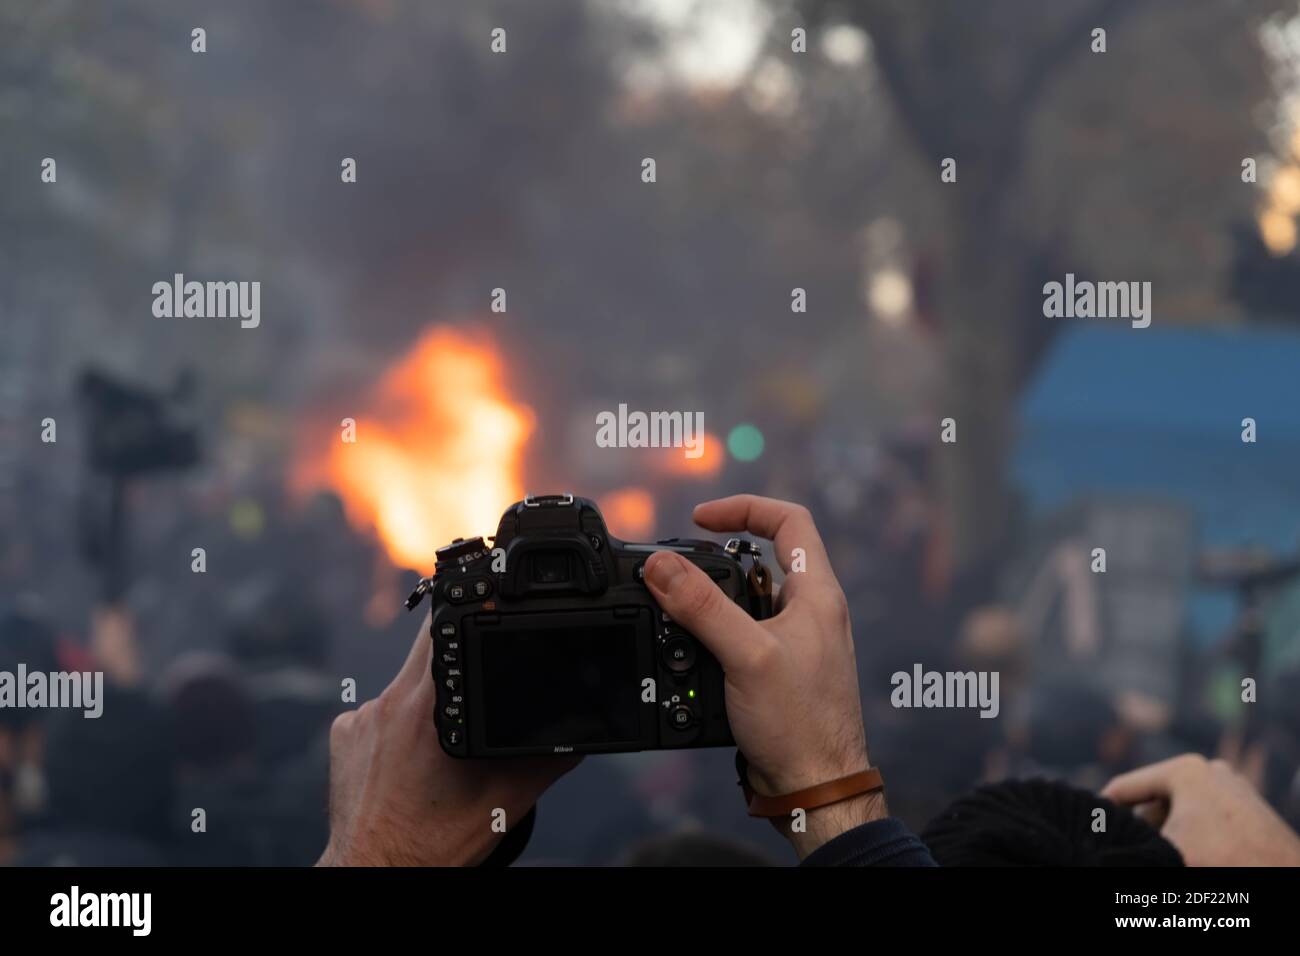 Paris, France - November 28th 2020 : at the march against the global security law, a person taking a picture while protesters are burning a trash can Stock Photo